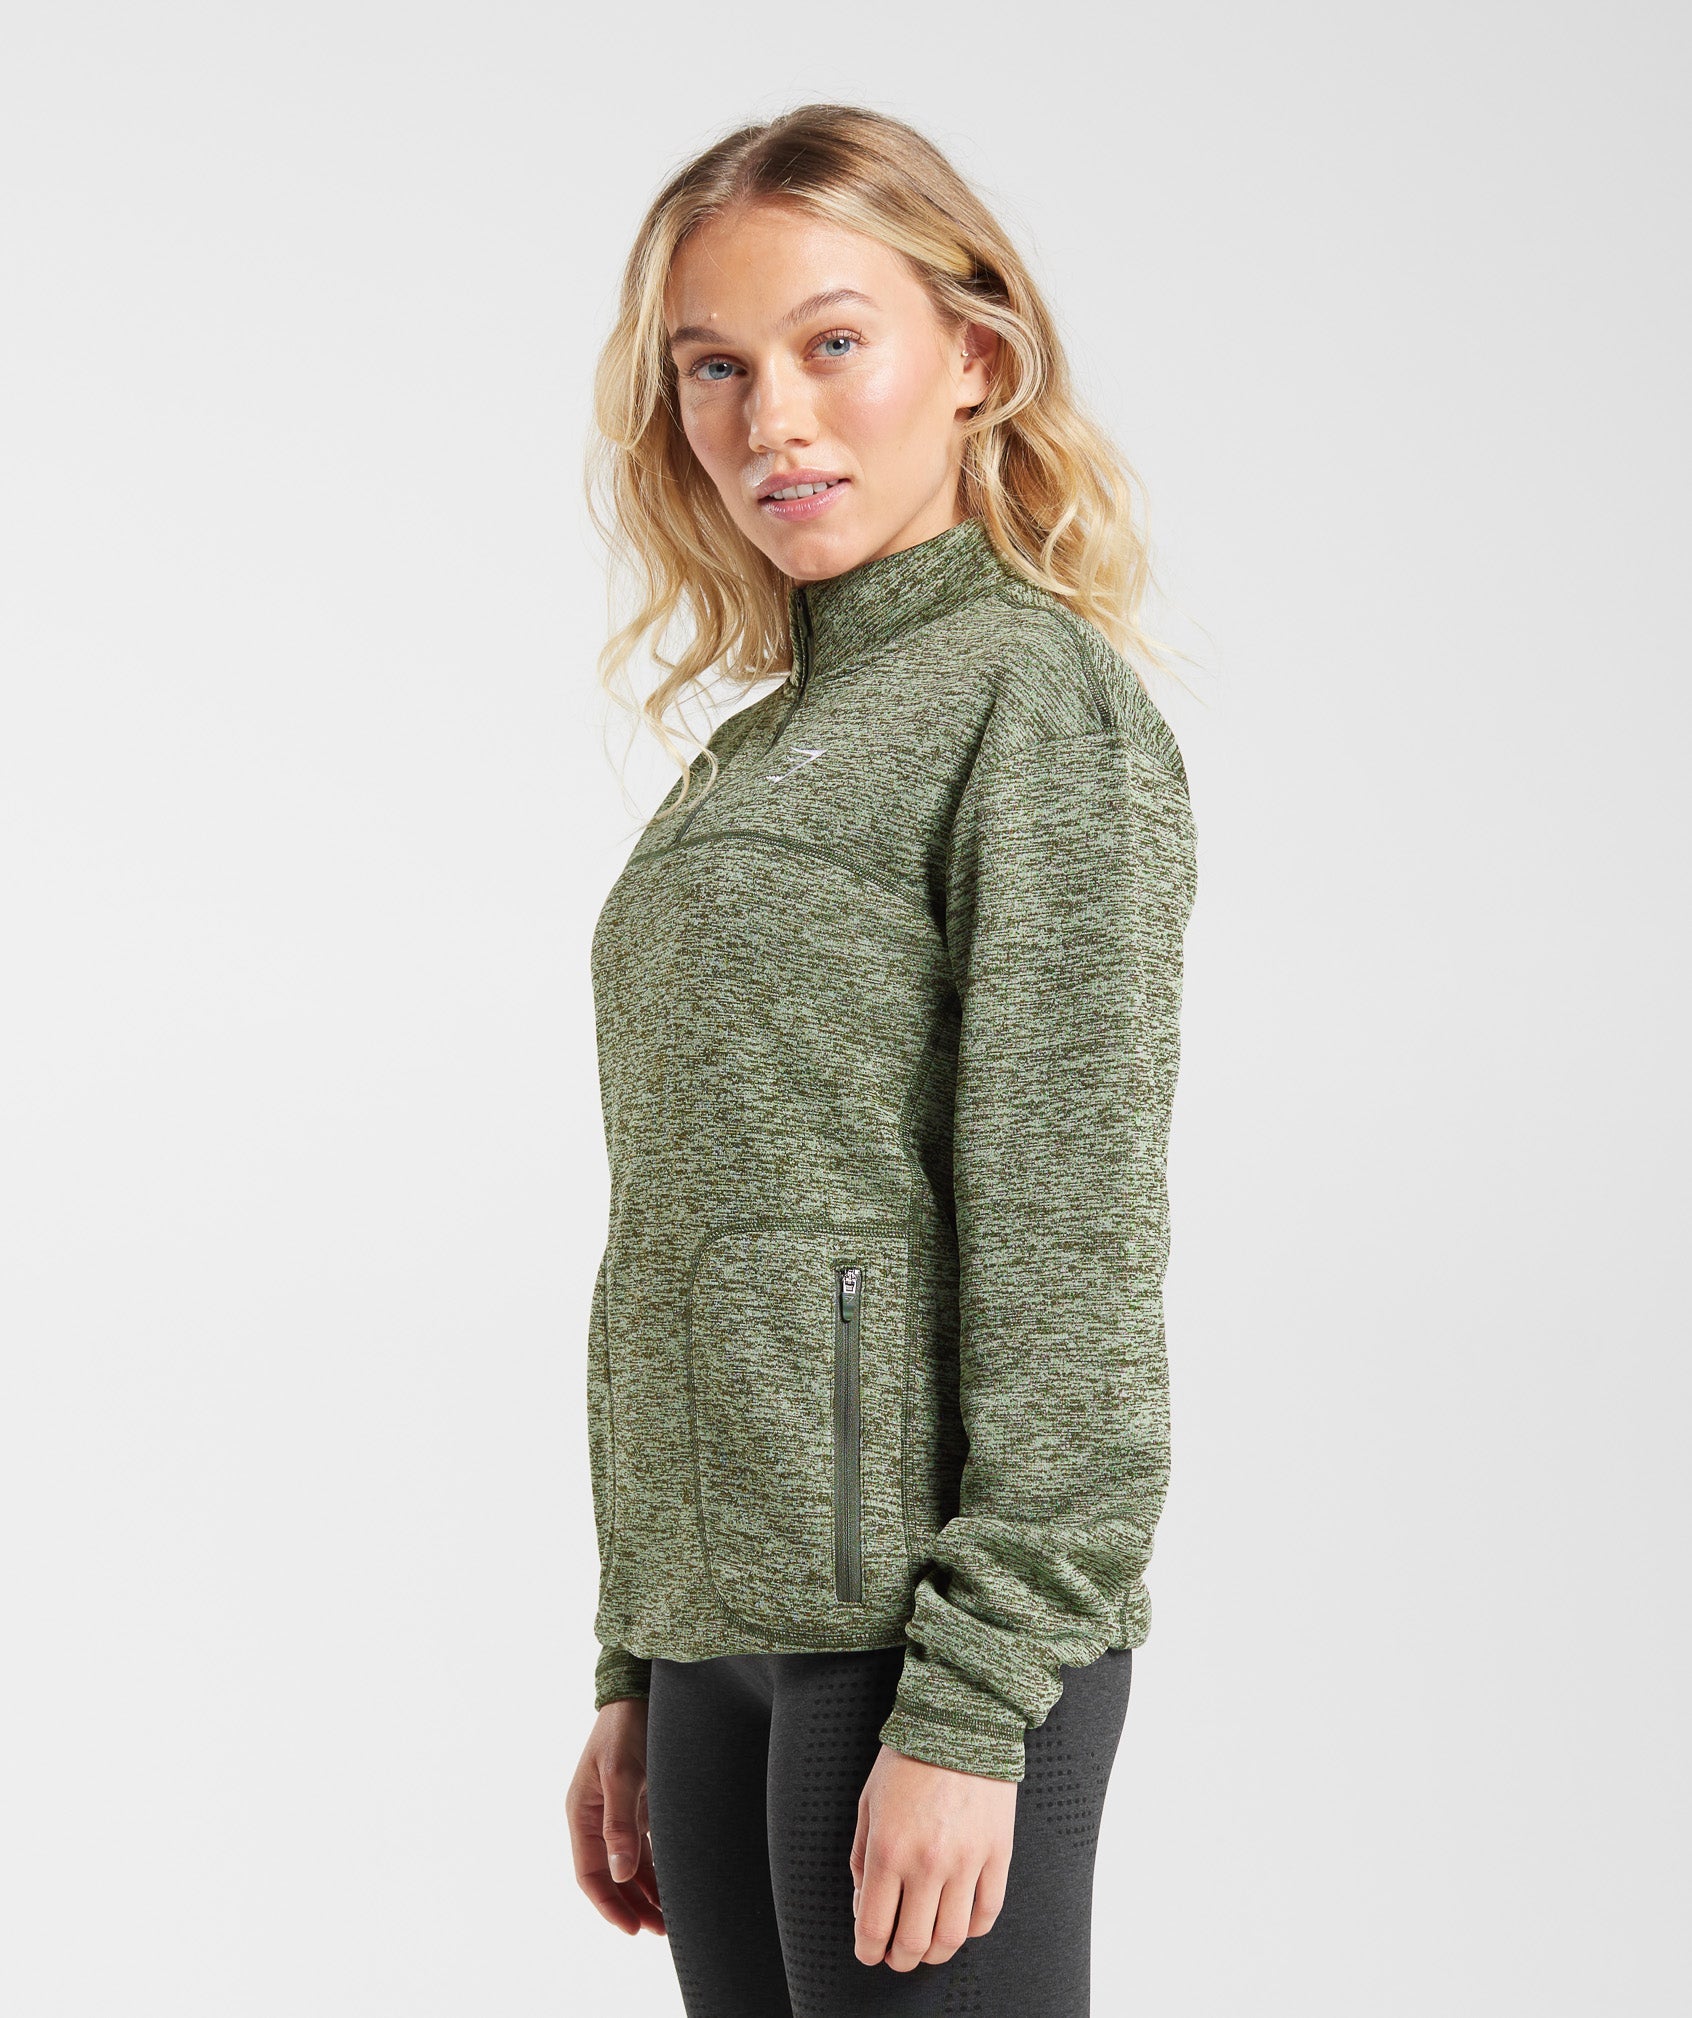 Thermal Fleece 1/4 Zip Pullover in Winter Olive/Light Sage Green - view 3